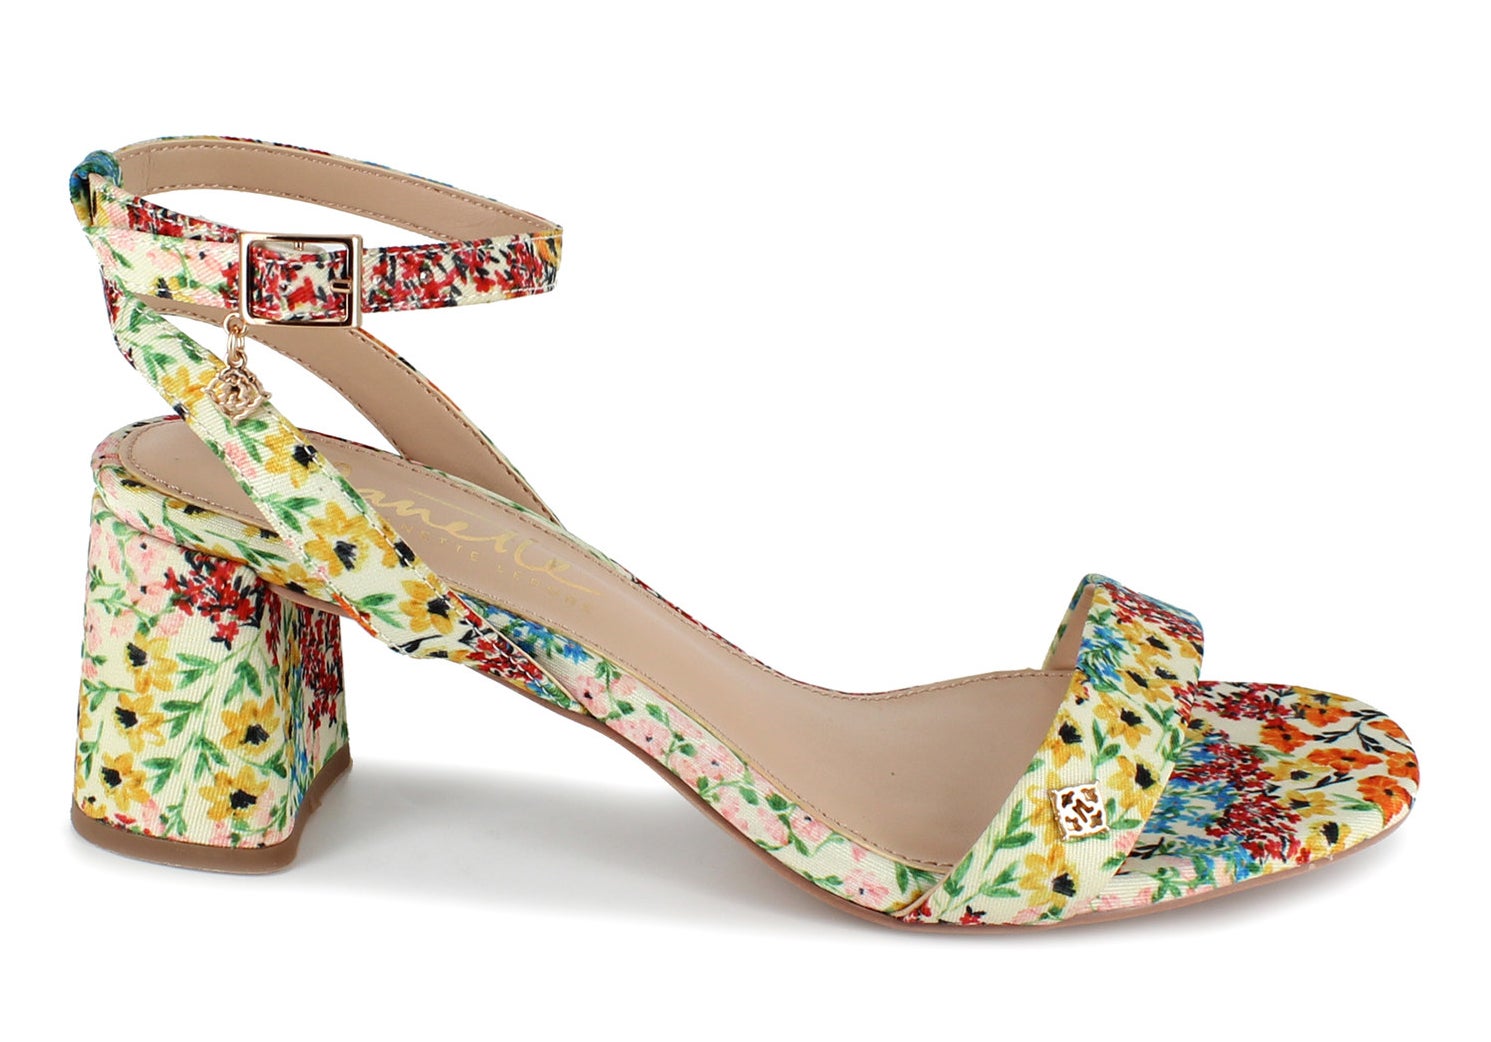 An ivory floral pattern sandal with an ankle strap and light insole